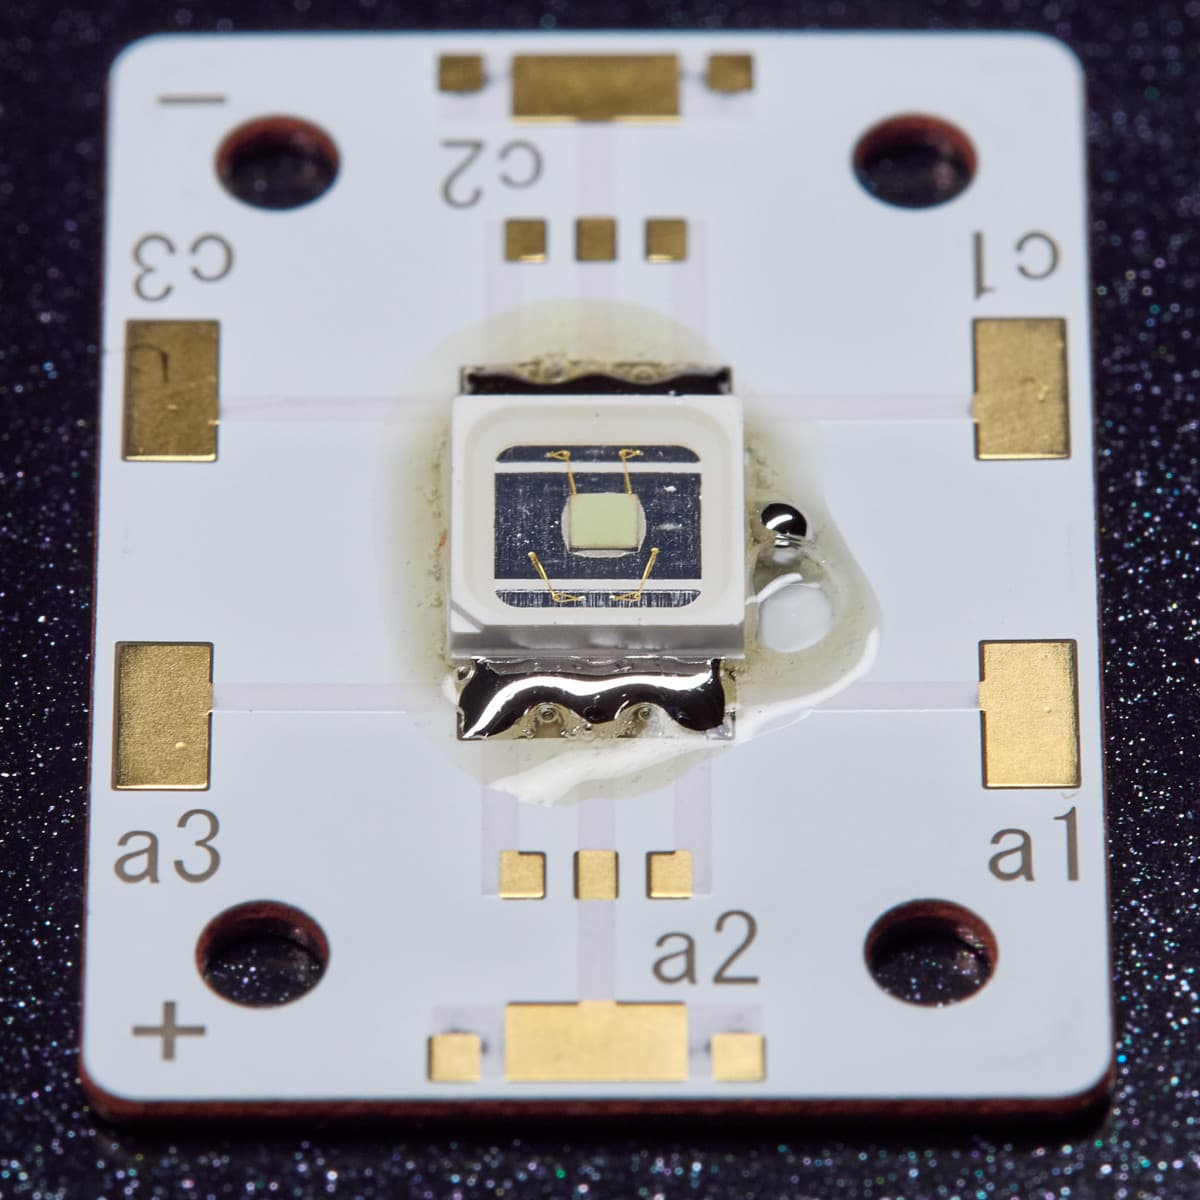 SMB1N-BB450 LED soldered to metal-core circuit board